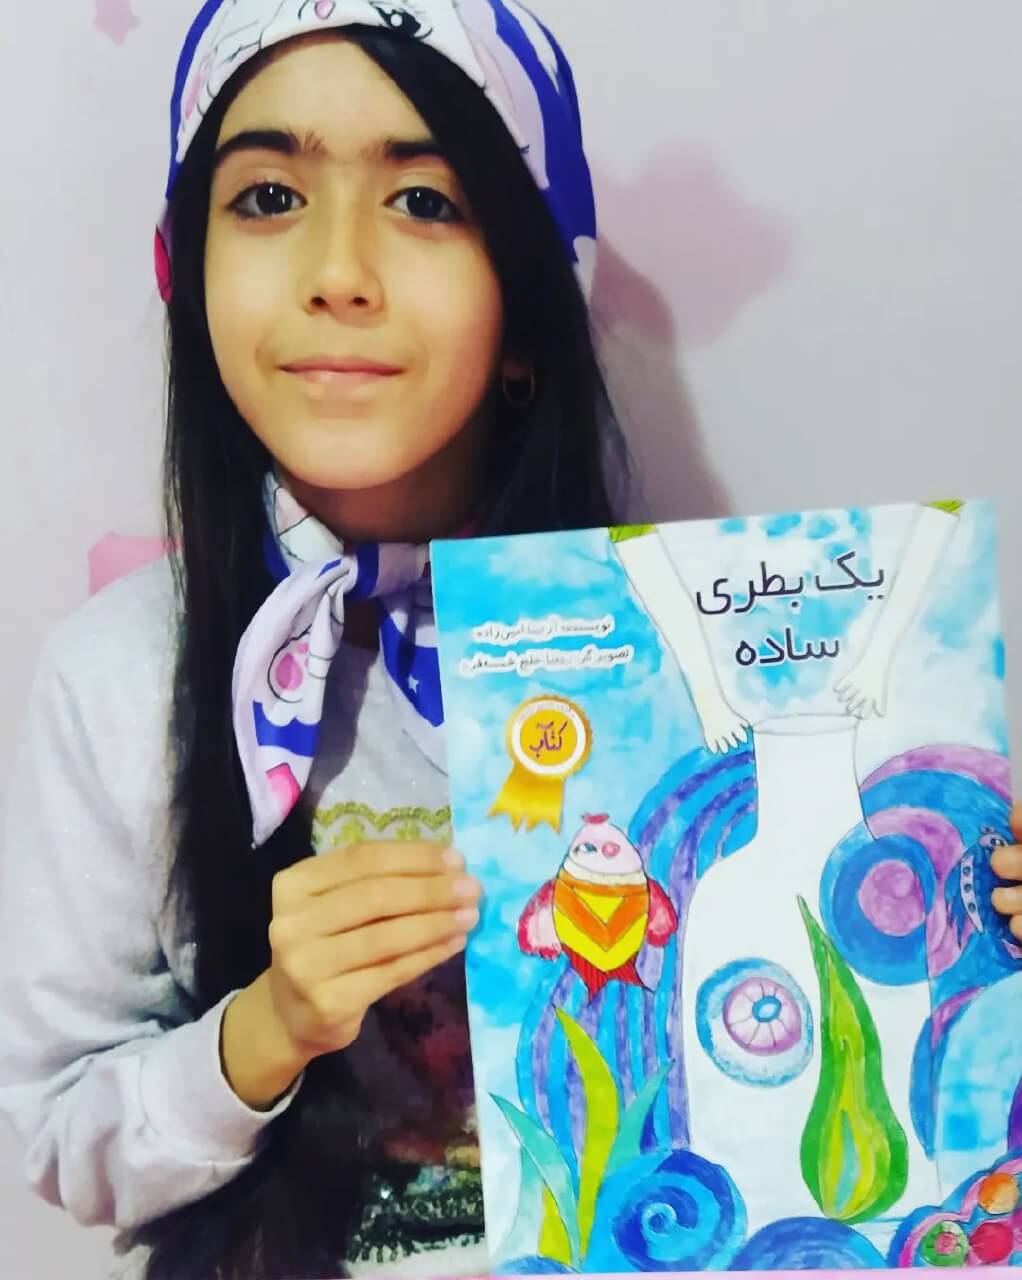 Photograph of Ronia Khalaj holding proudly in her hands one of her published children's books.